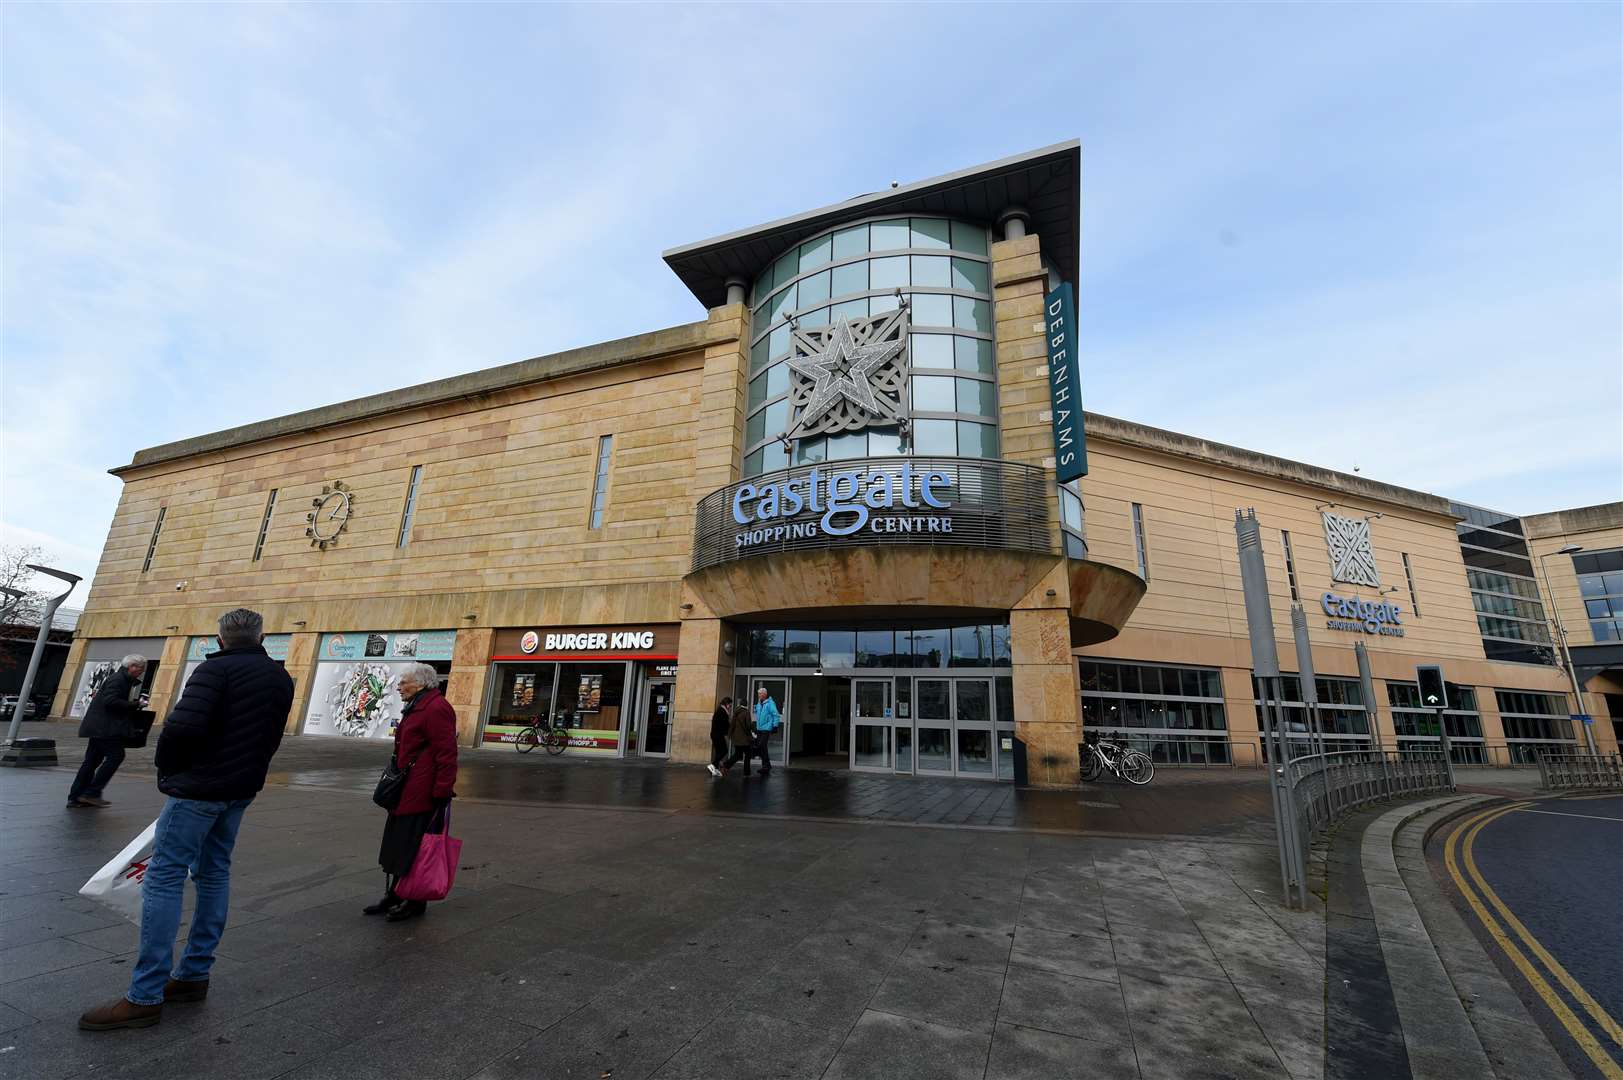 A Santa's grotto will be in place at Eastgate Shopping Centre.